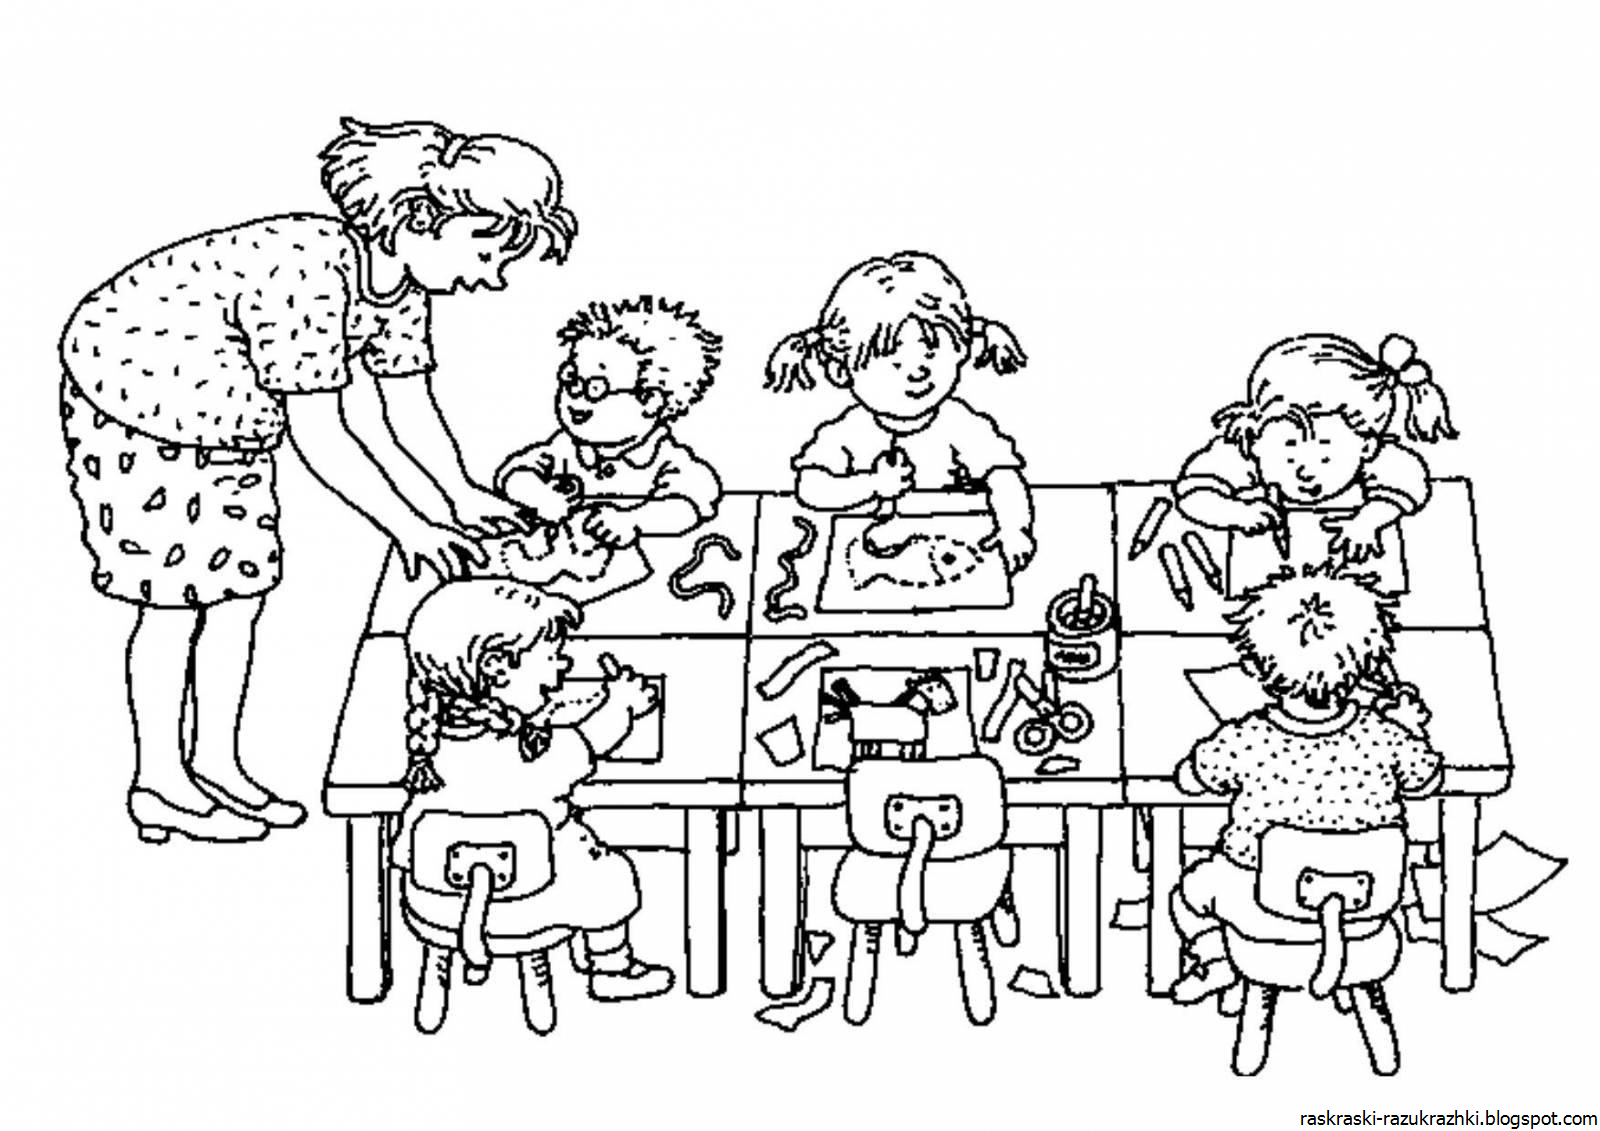 Doing work Coloring Page for Kids - Free School Printable Coloring Pages  Online for Kids - ColoringPages101.com | Coloring Pages for Kids